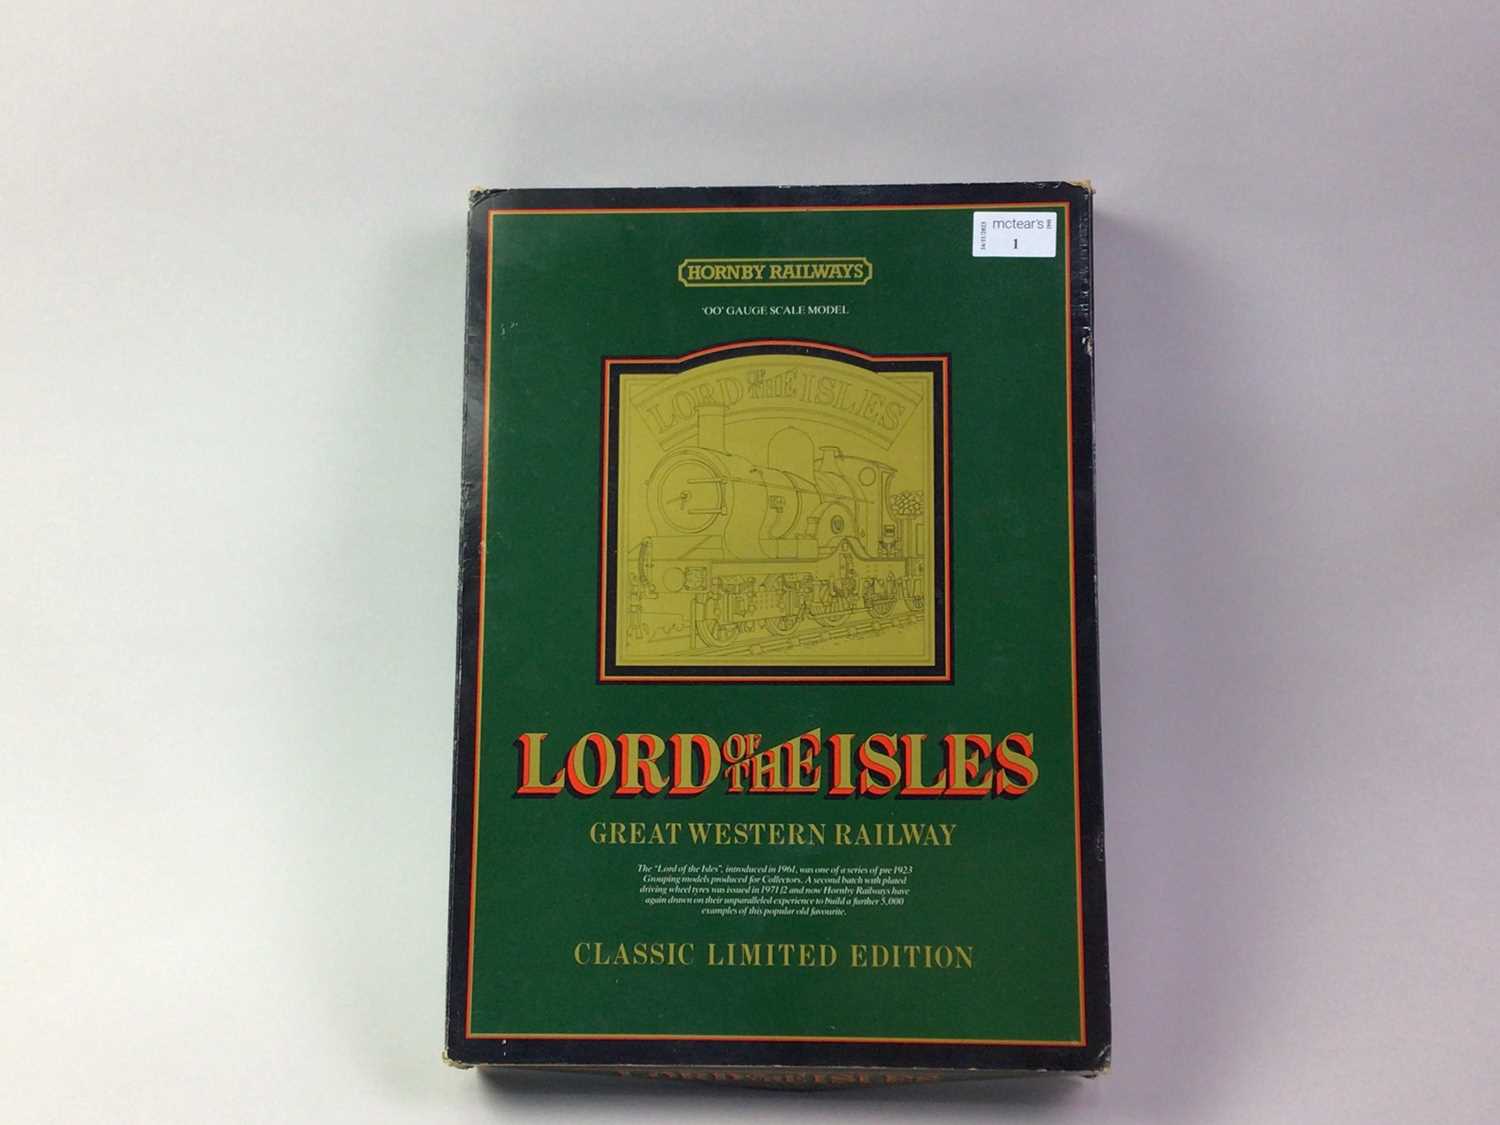 HORNBY RAILWAYS LORD OF THE ISLES GREAT WESTERN RAILWAY CLASSIC LIMITED EDITION TRAIN SET, - Image 2 of 3